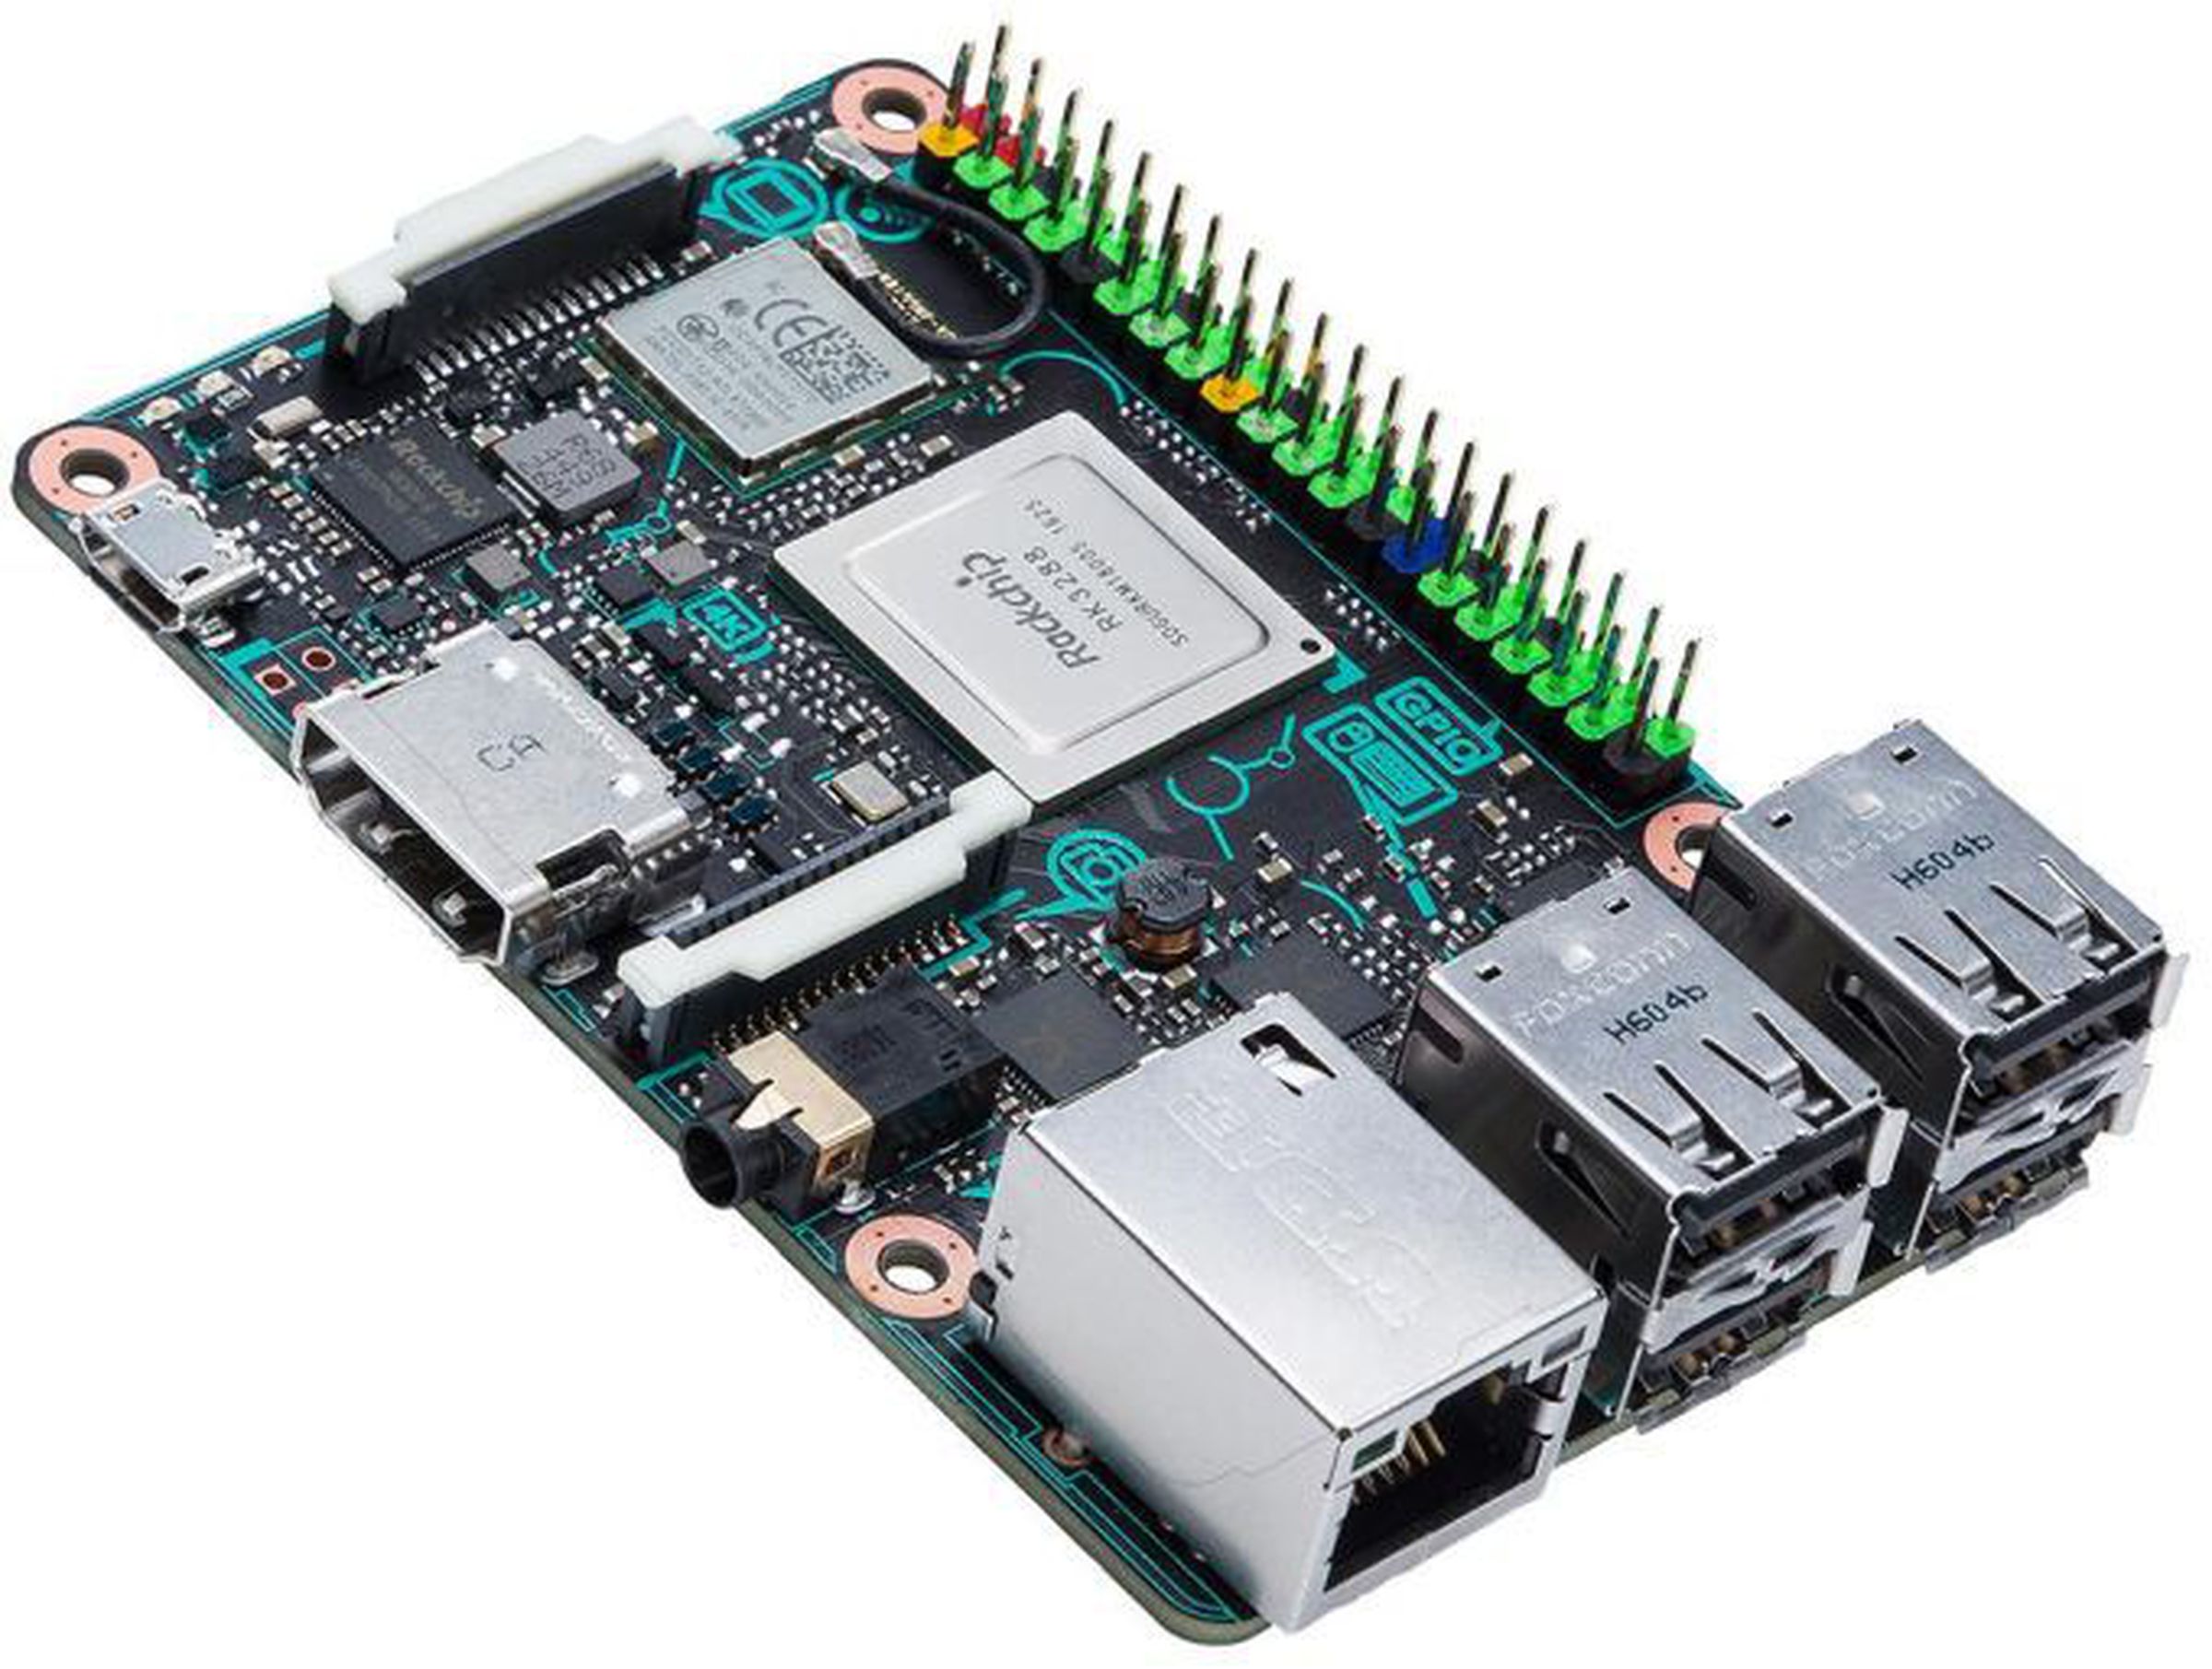 The Tinker Board is more powerful than the most recent Raspberry Pi — but pricier, too.